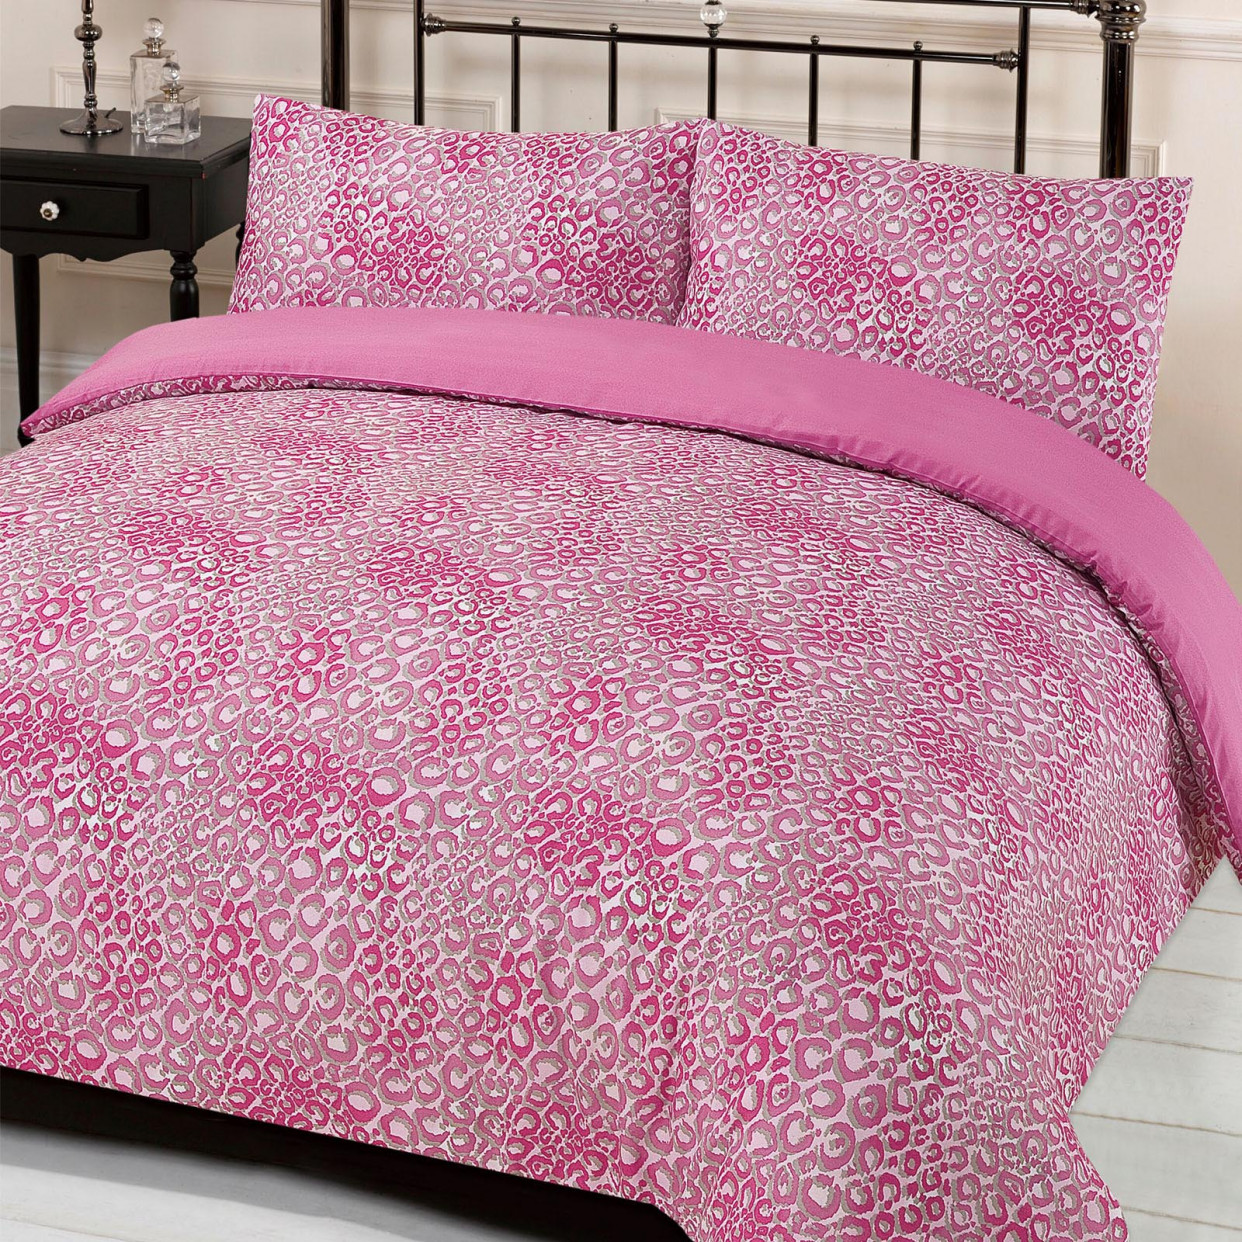 Leopard Print Quilt Cover with Pillowcase Bedding Set Jengo Pink - Double>